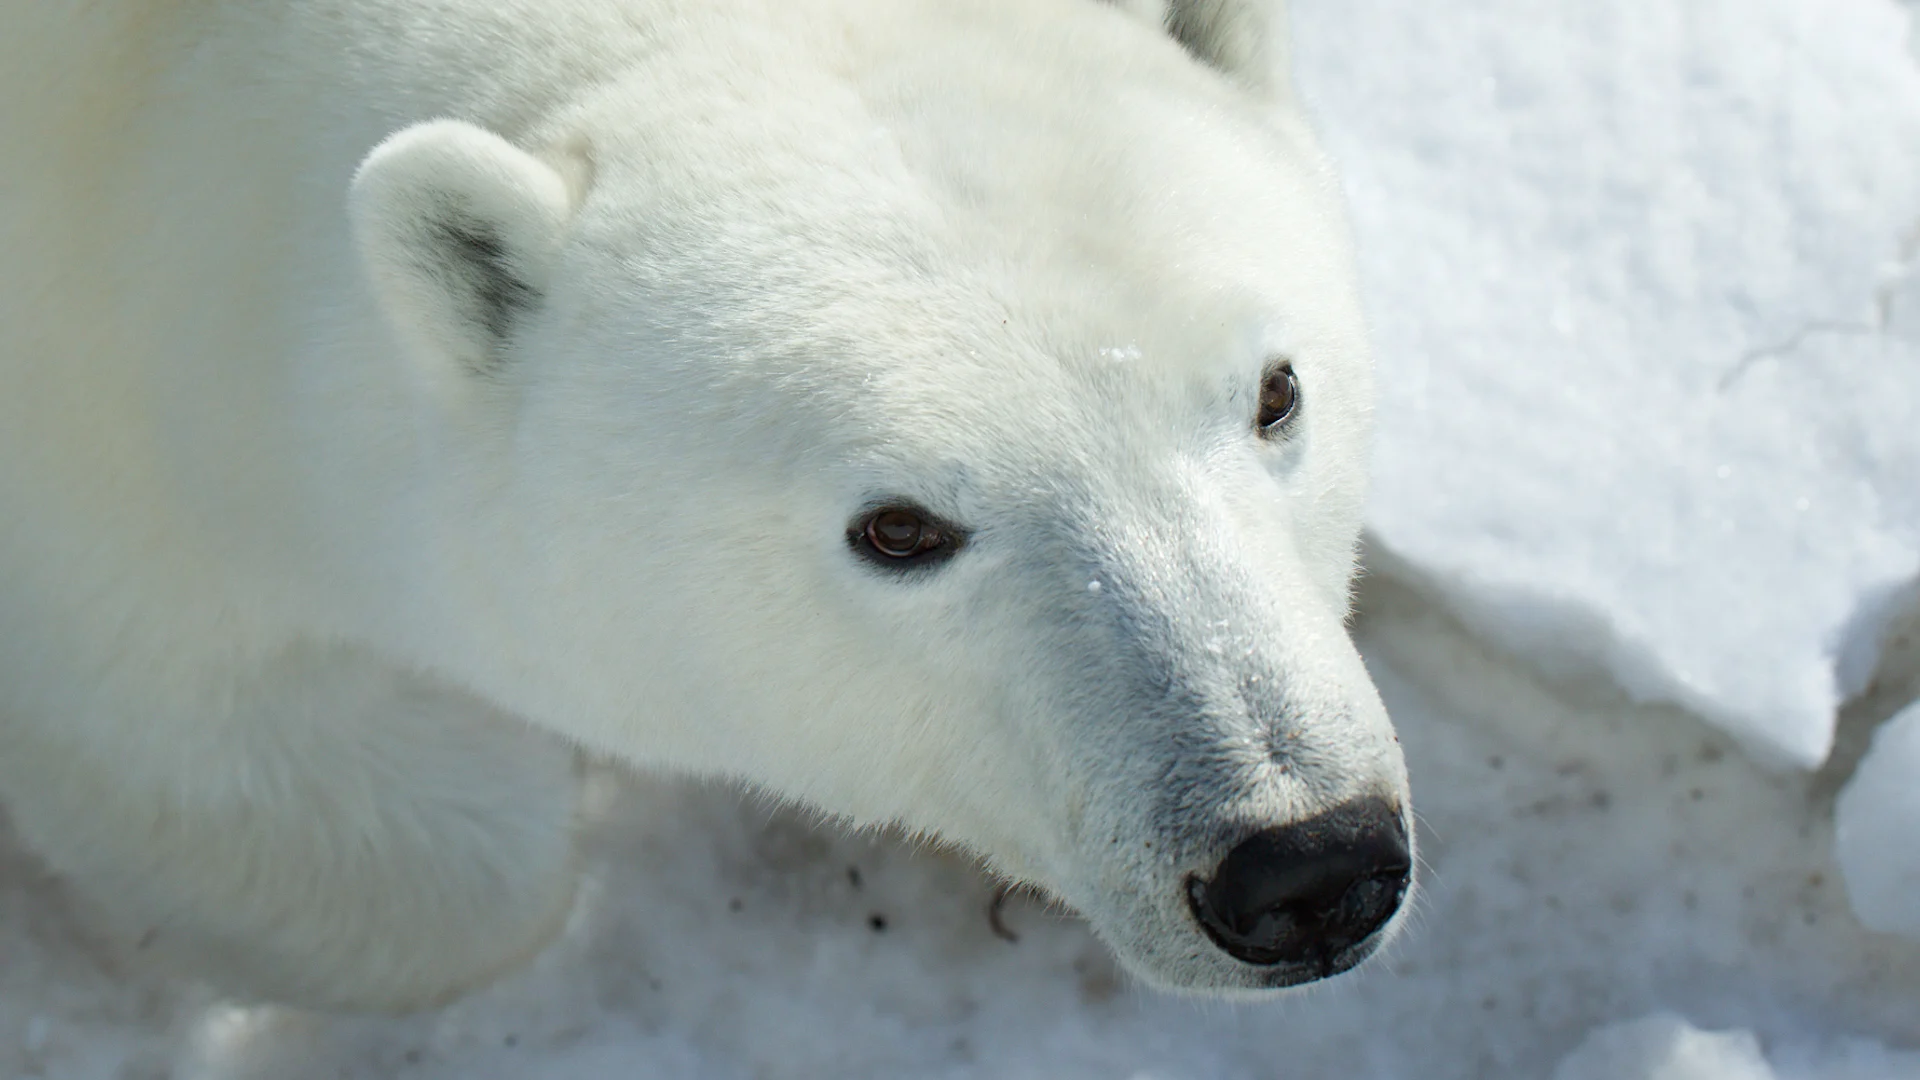 Hudson Bay’s iconic polar bears at risk of extinction in coming years: study